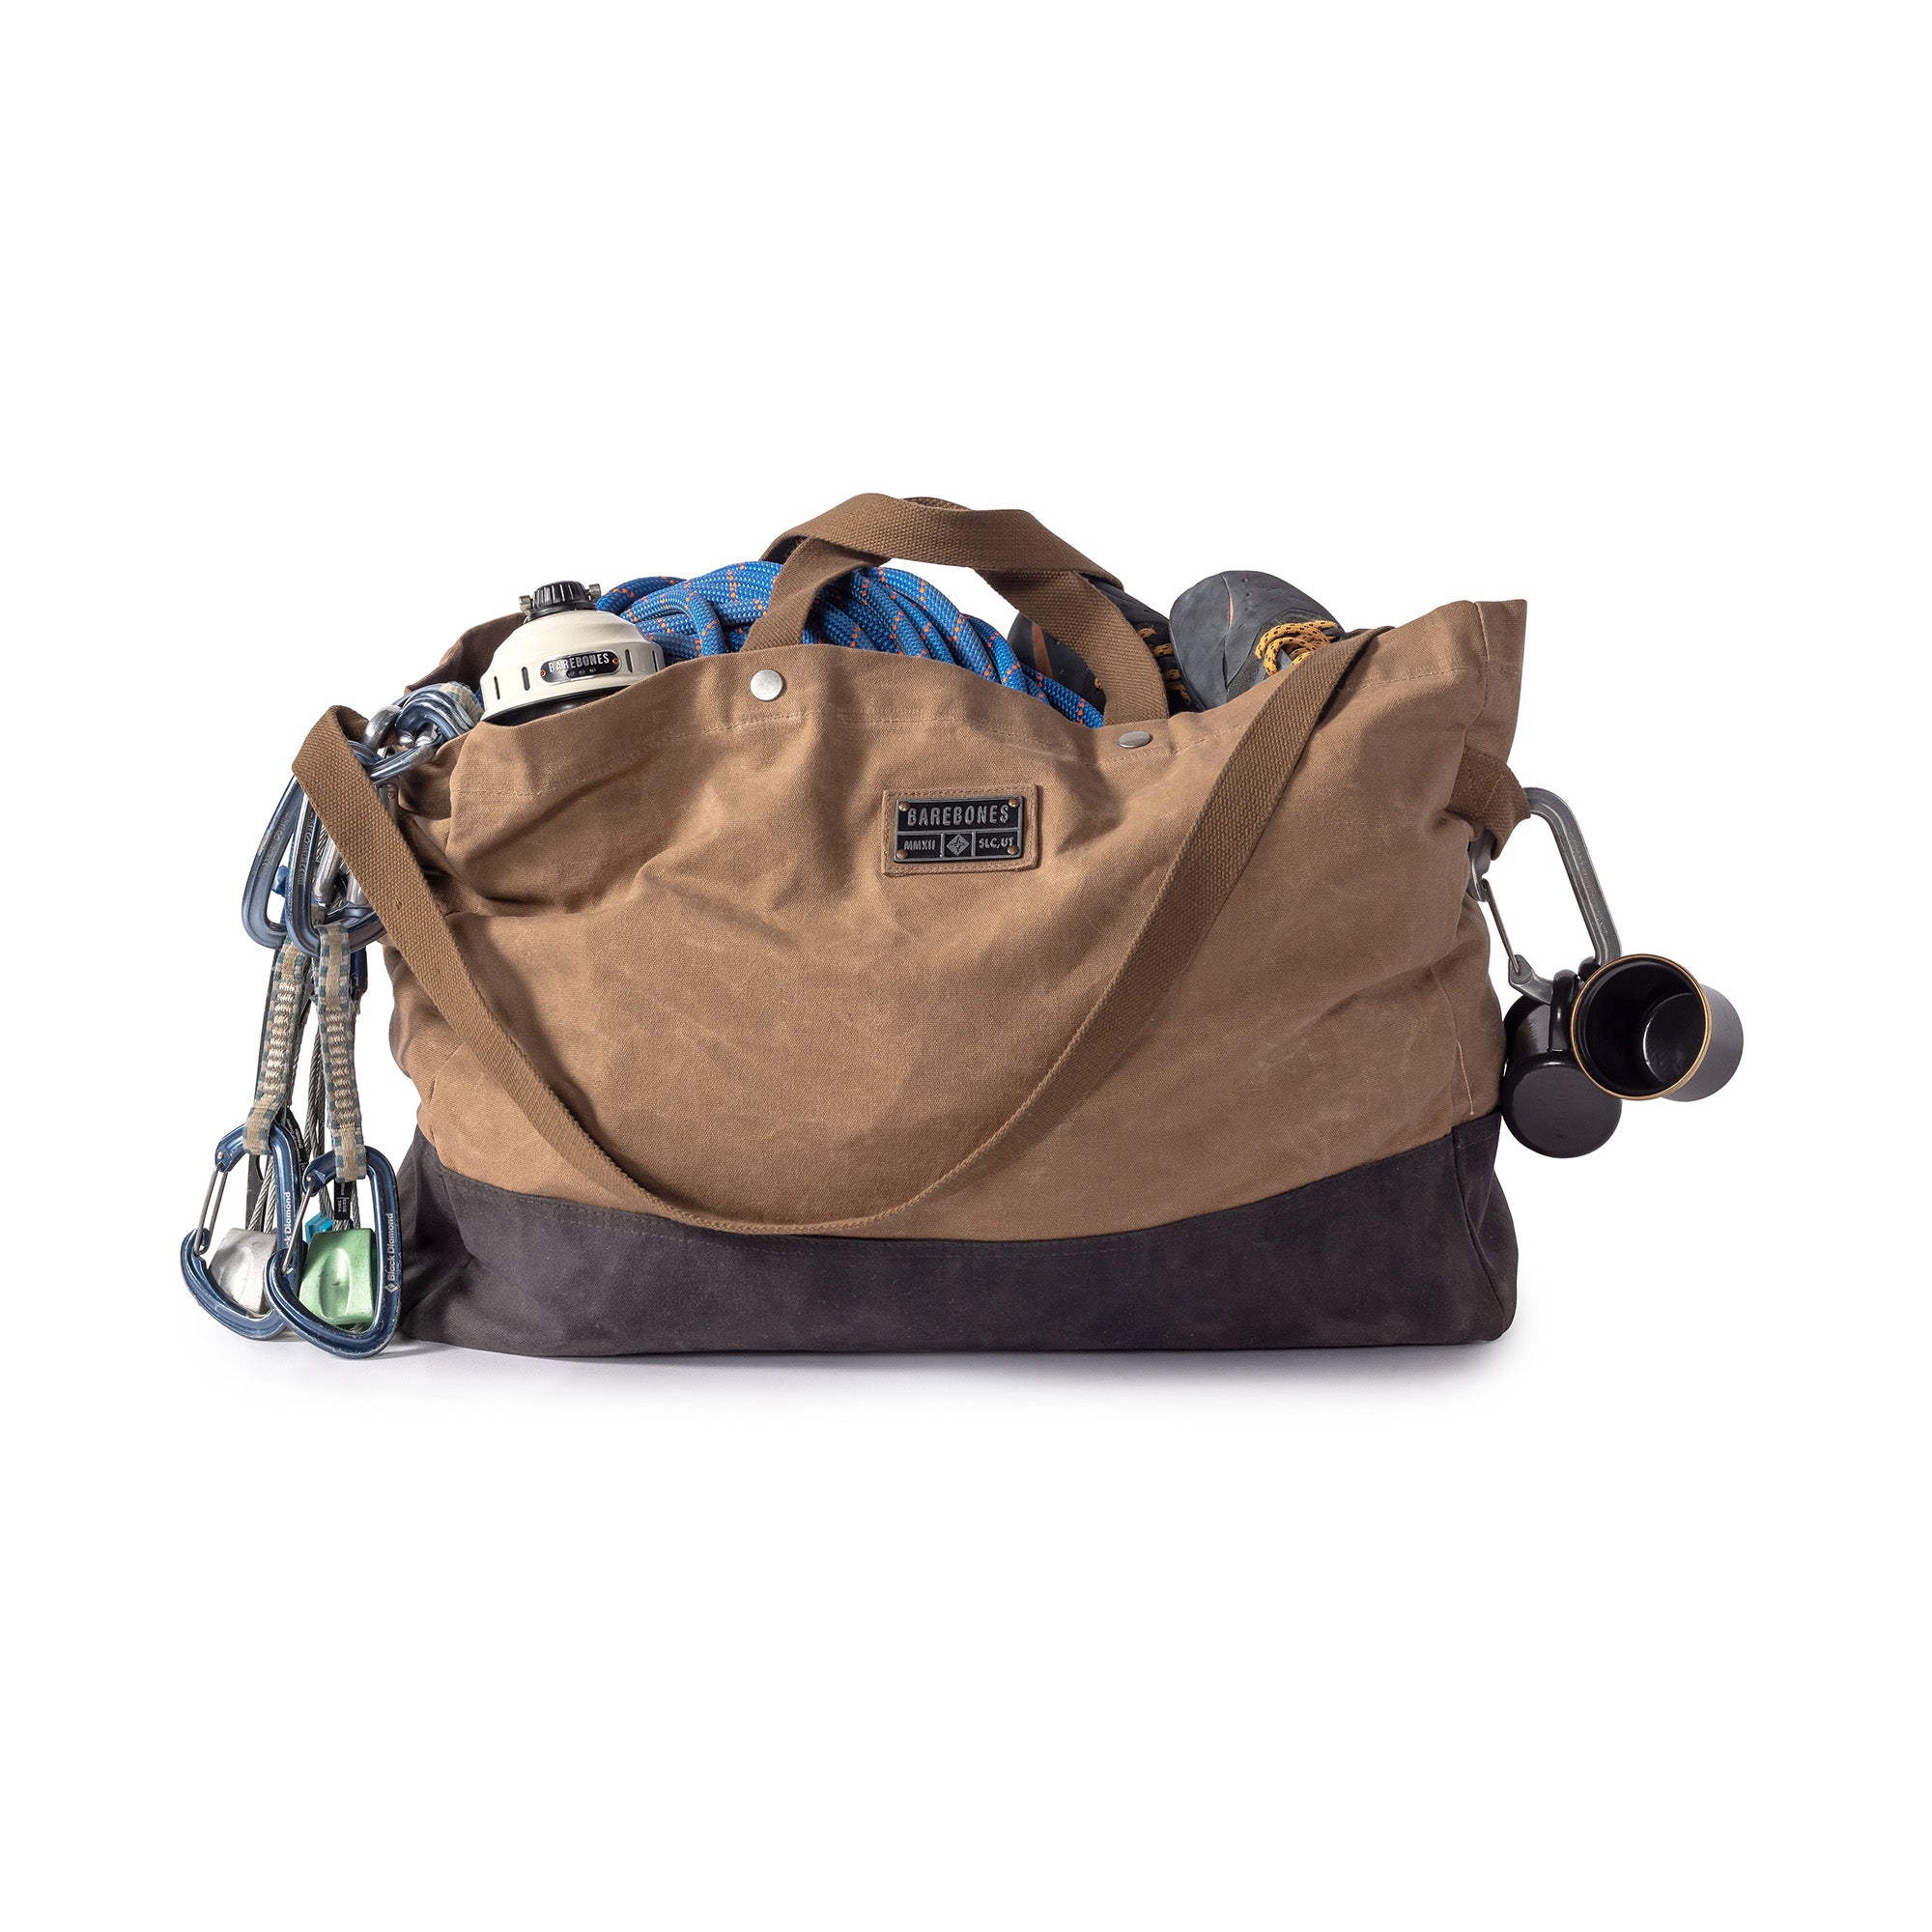 FIREWOOD CARRIER TOTE